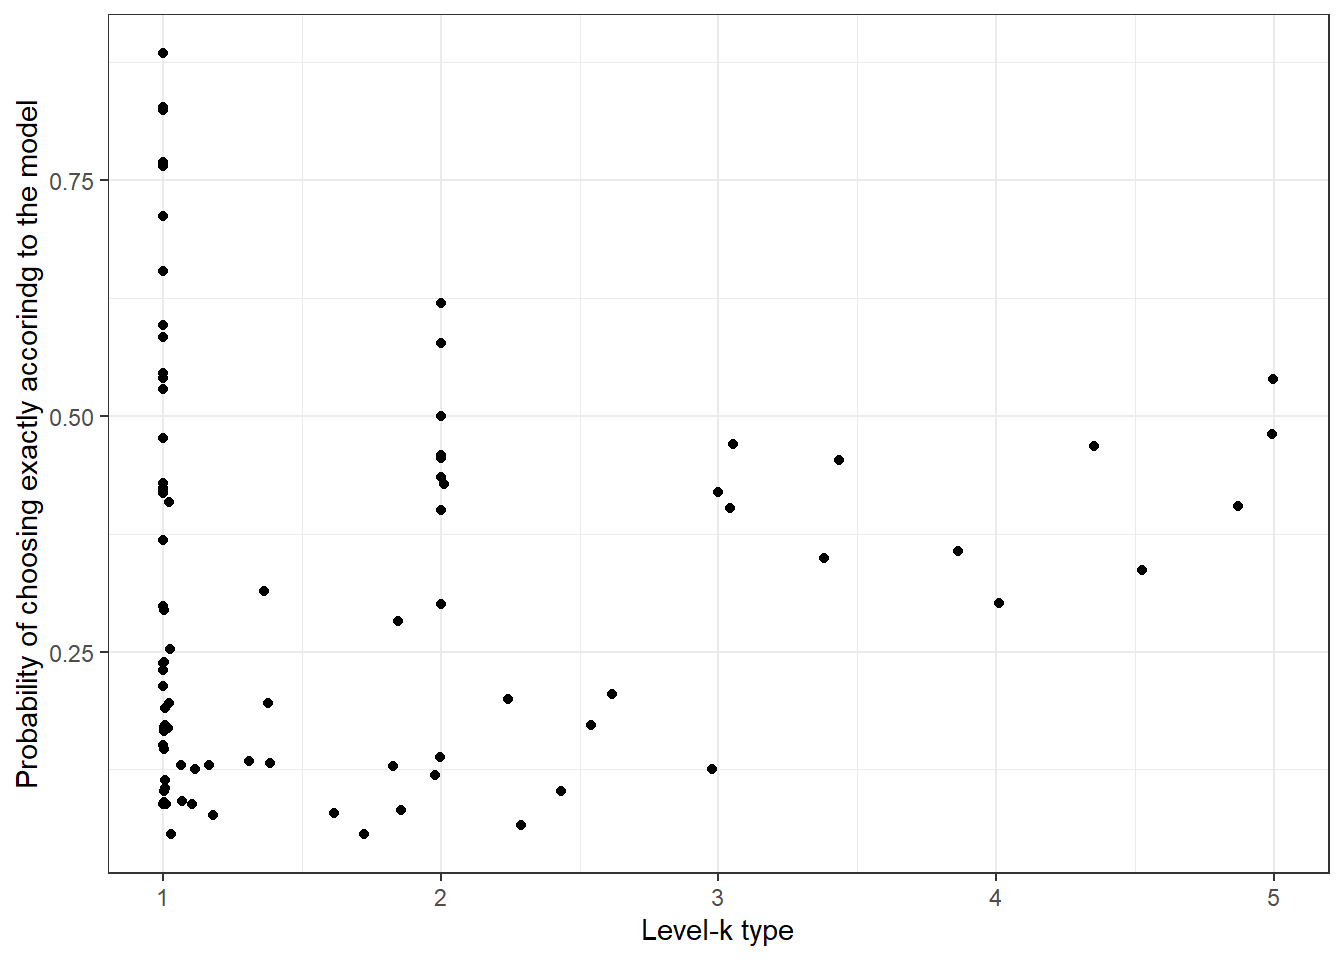 Bayesian model averages for the level-$k$ type (horizontal axis) and the probability of choosing exactly accorindg to the model (vertical axis).